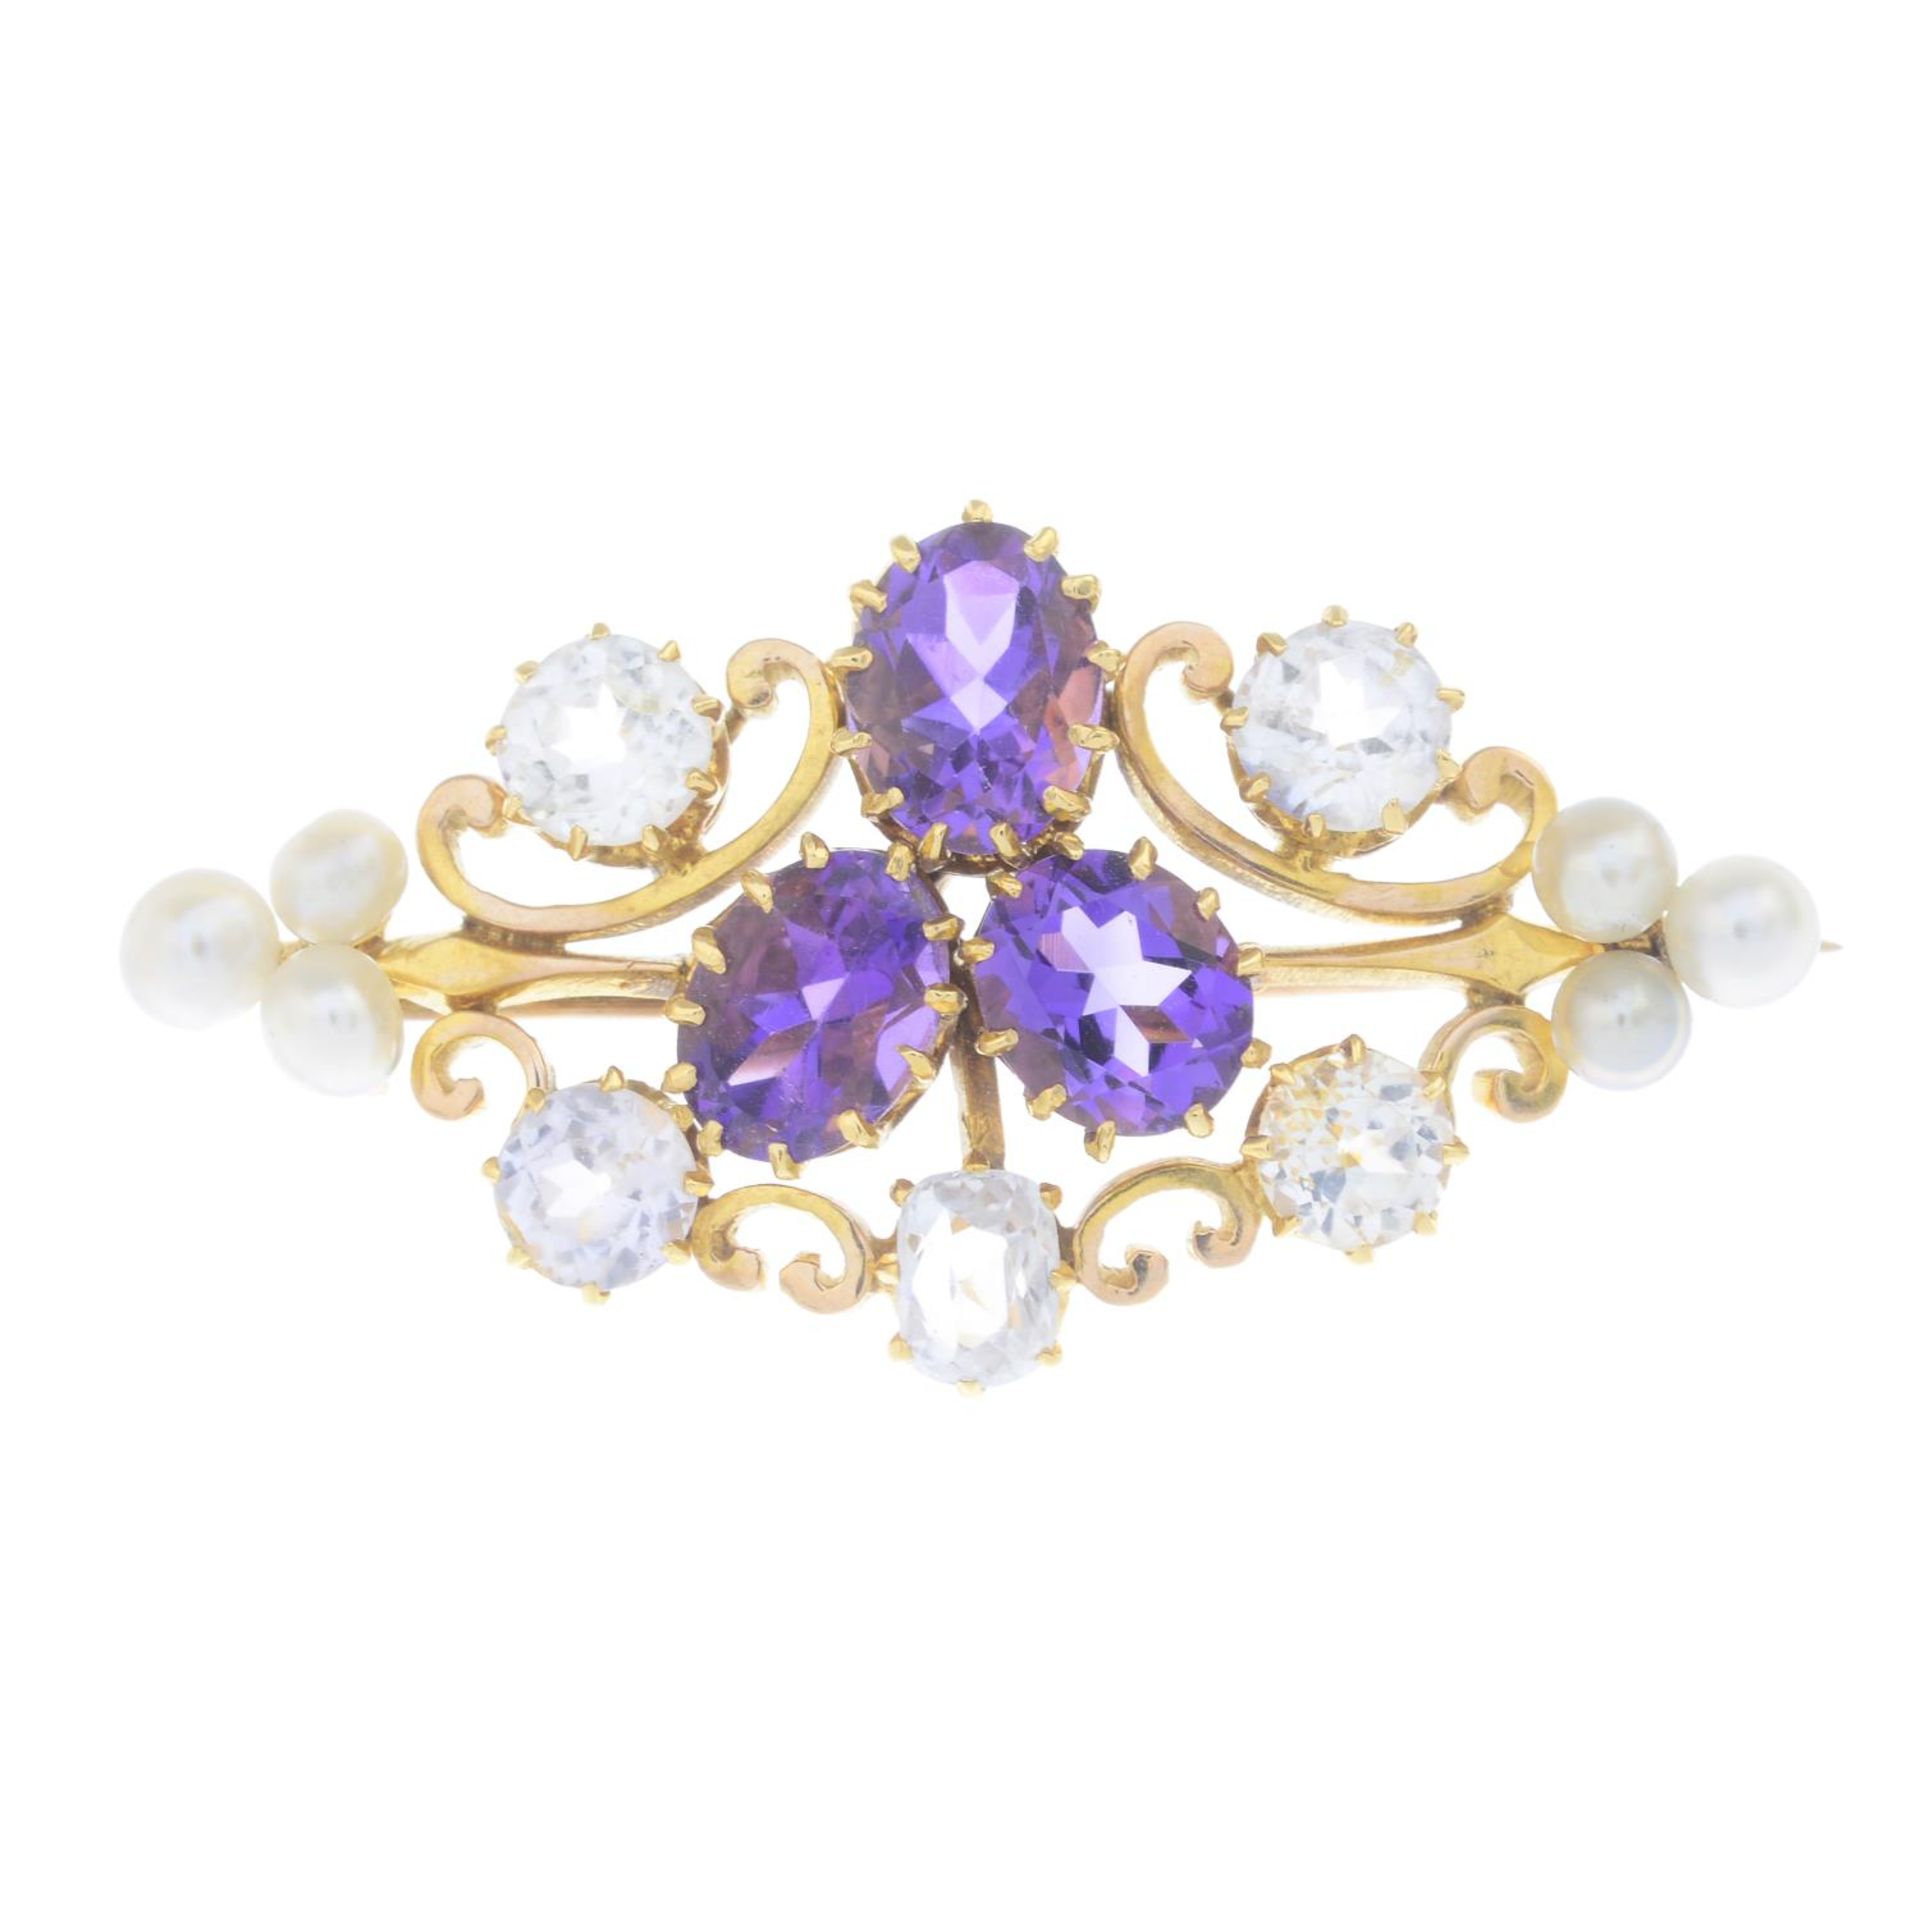 An early 20th century gold amethyst, white sapphire and pearl brooch.